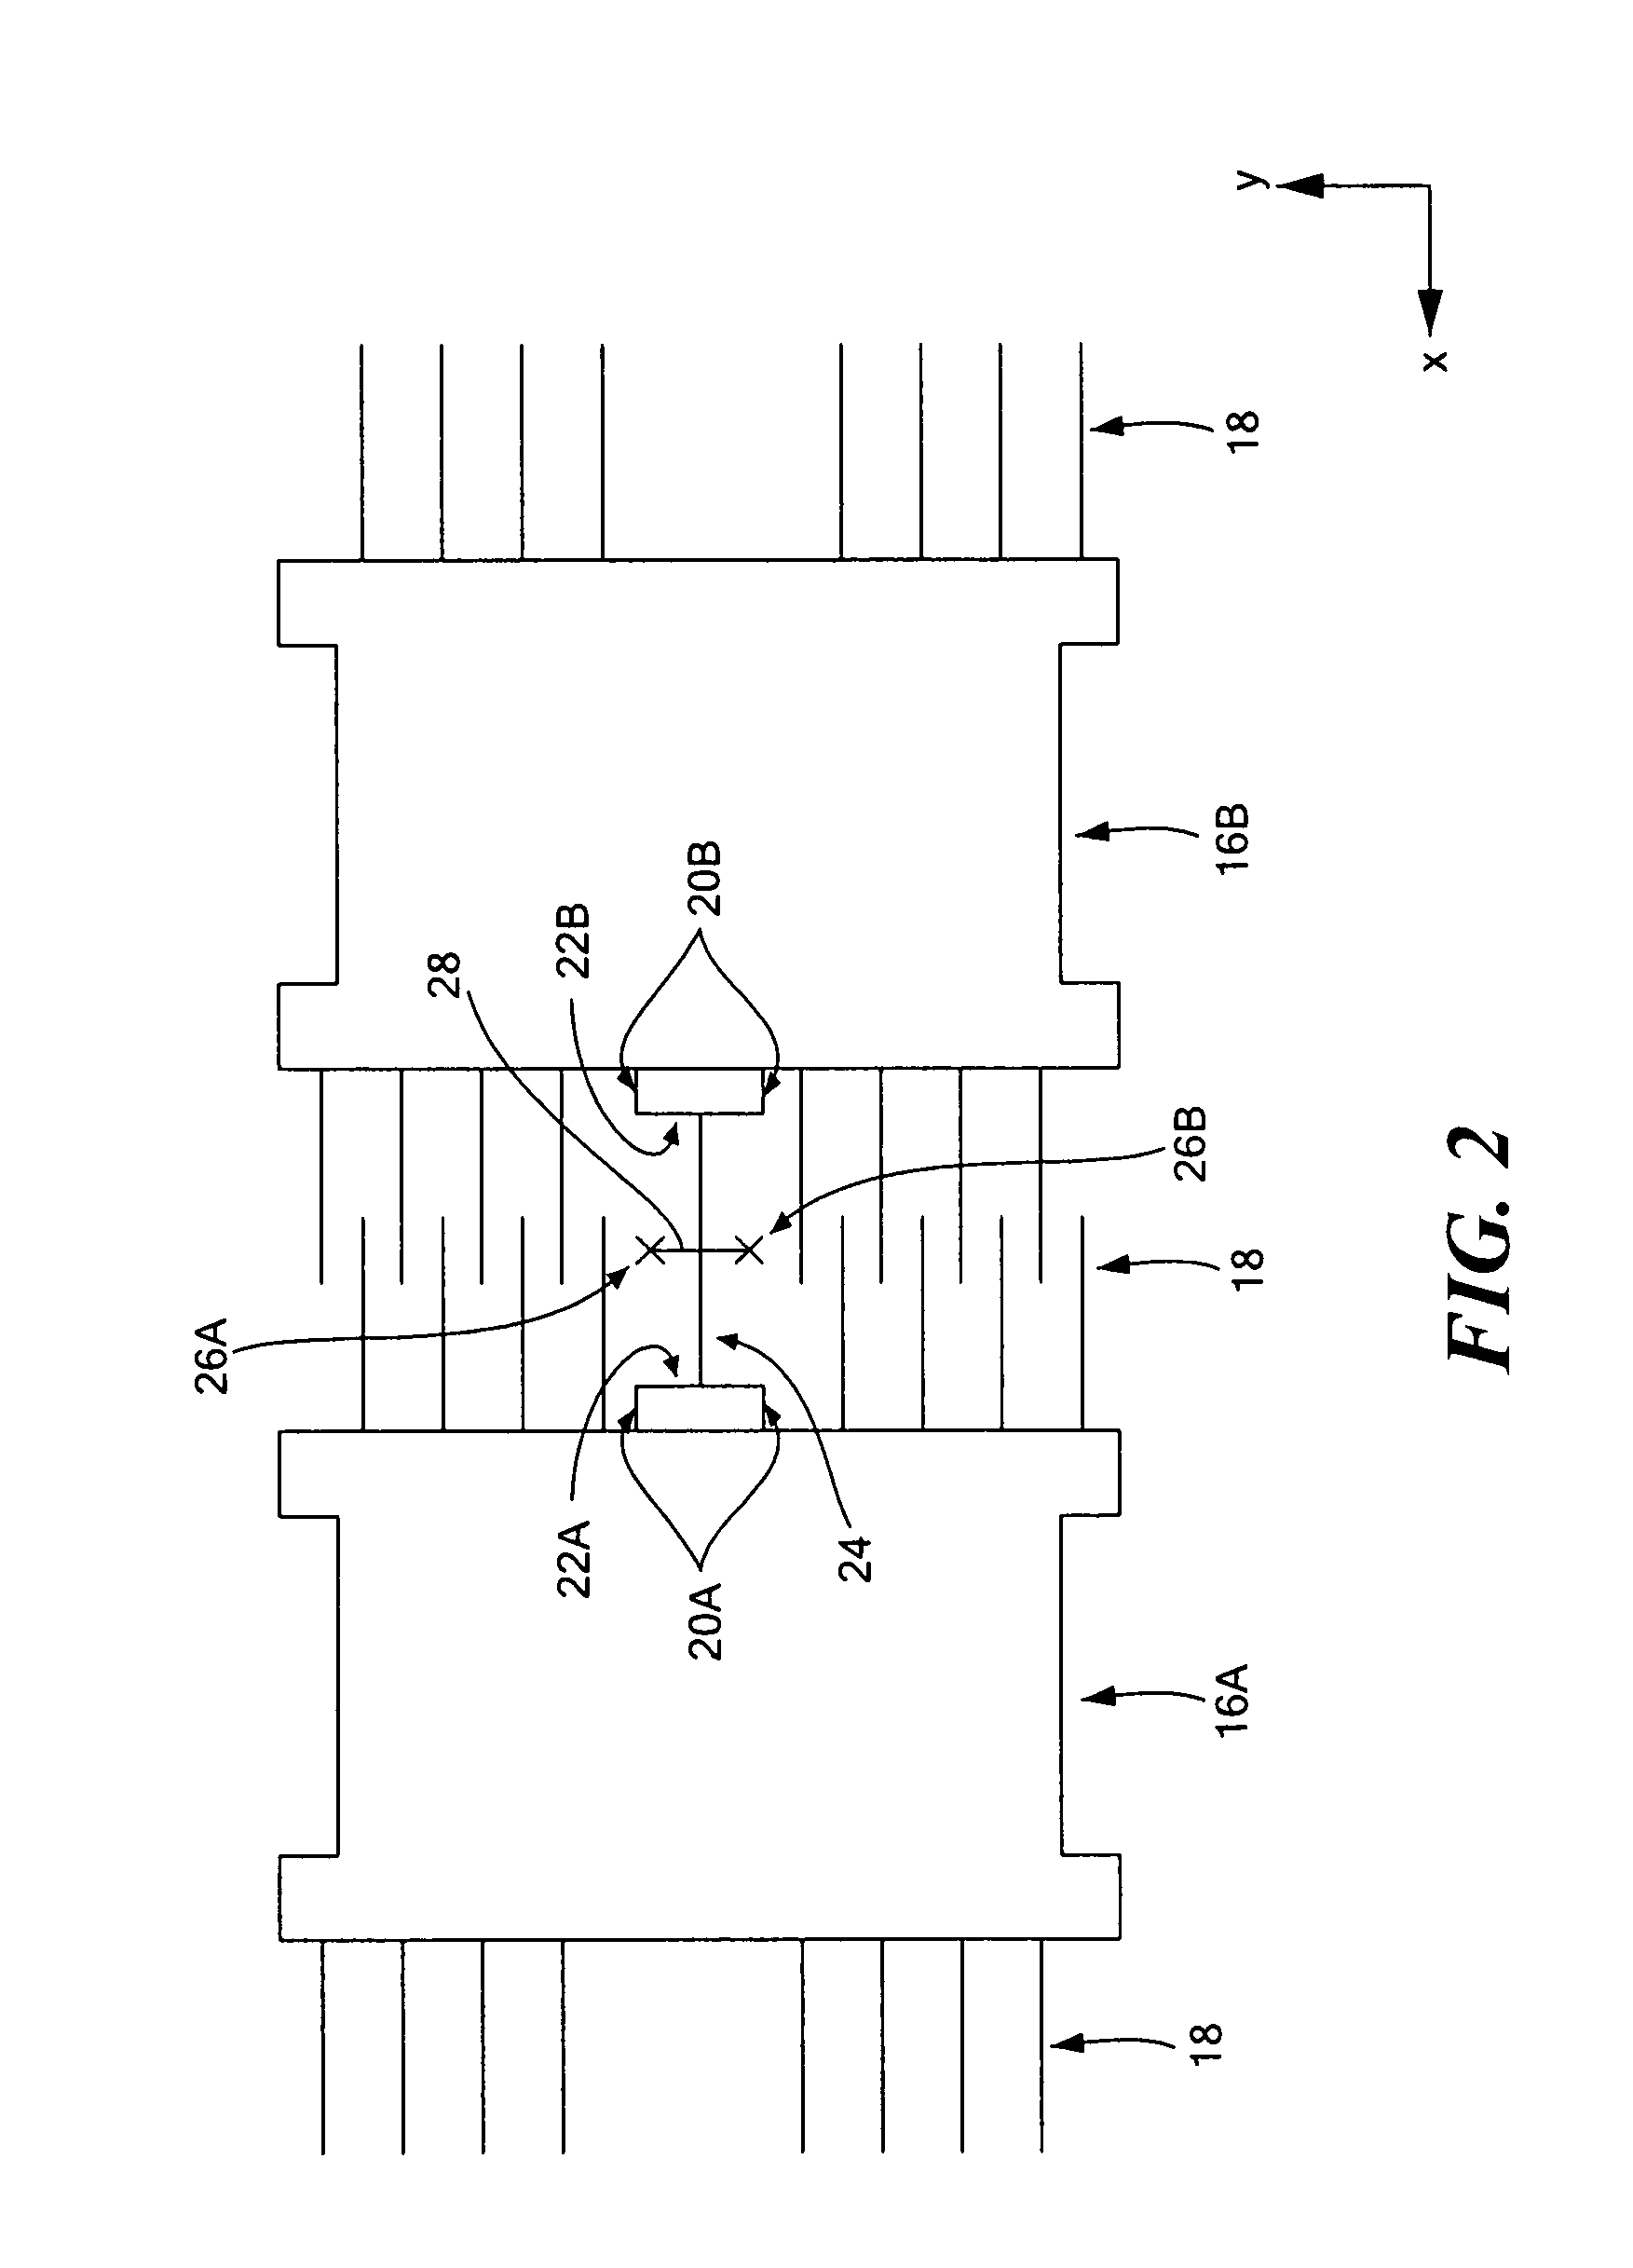 Cross-quad and vertically coupled inertial sensors